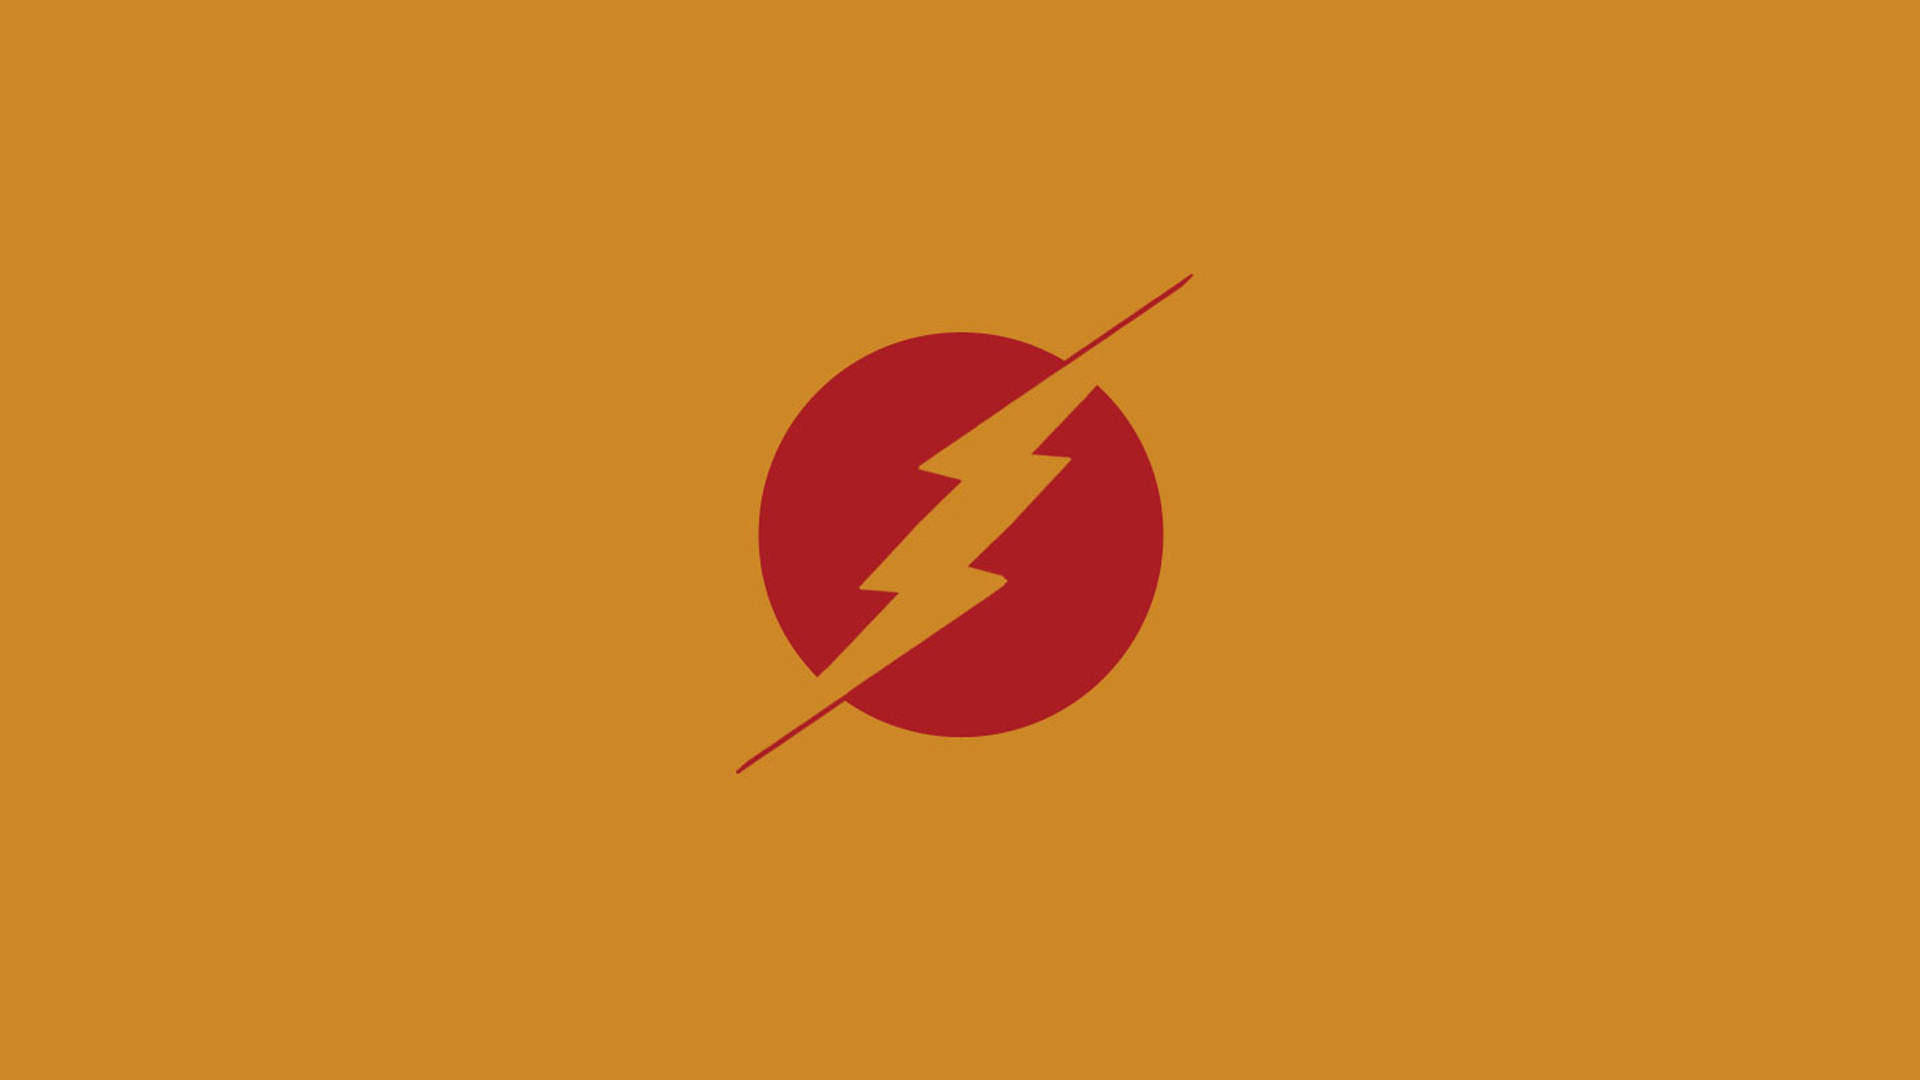 The Flash 4k Red And Mustard Background